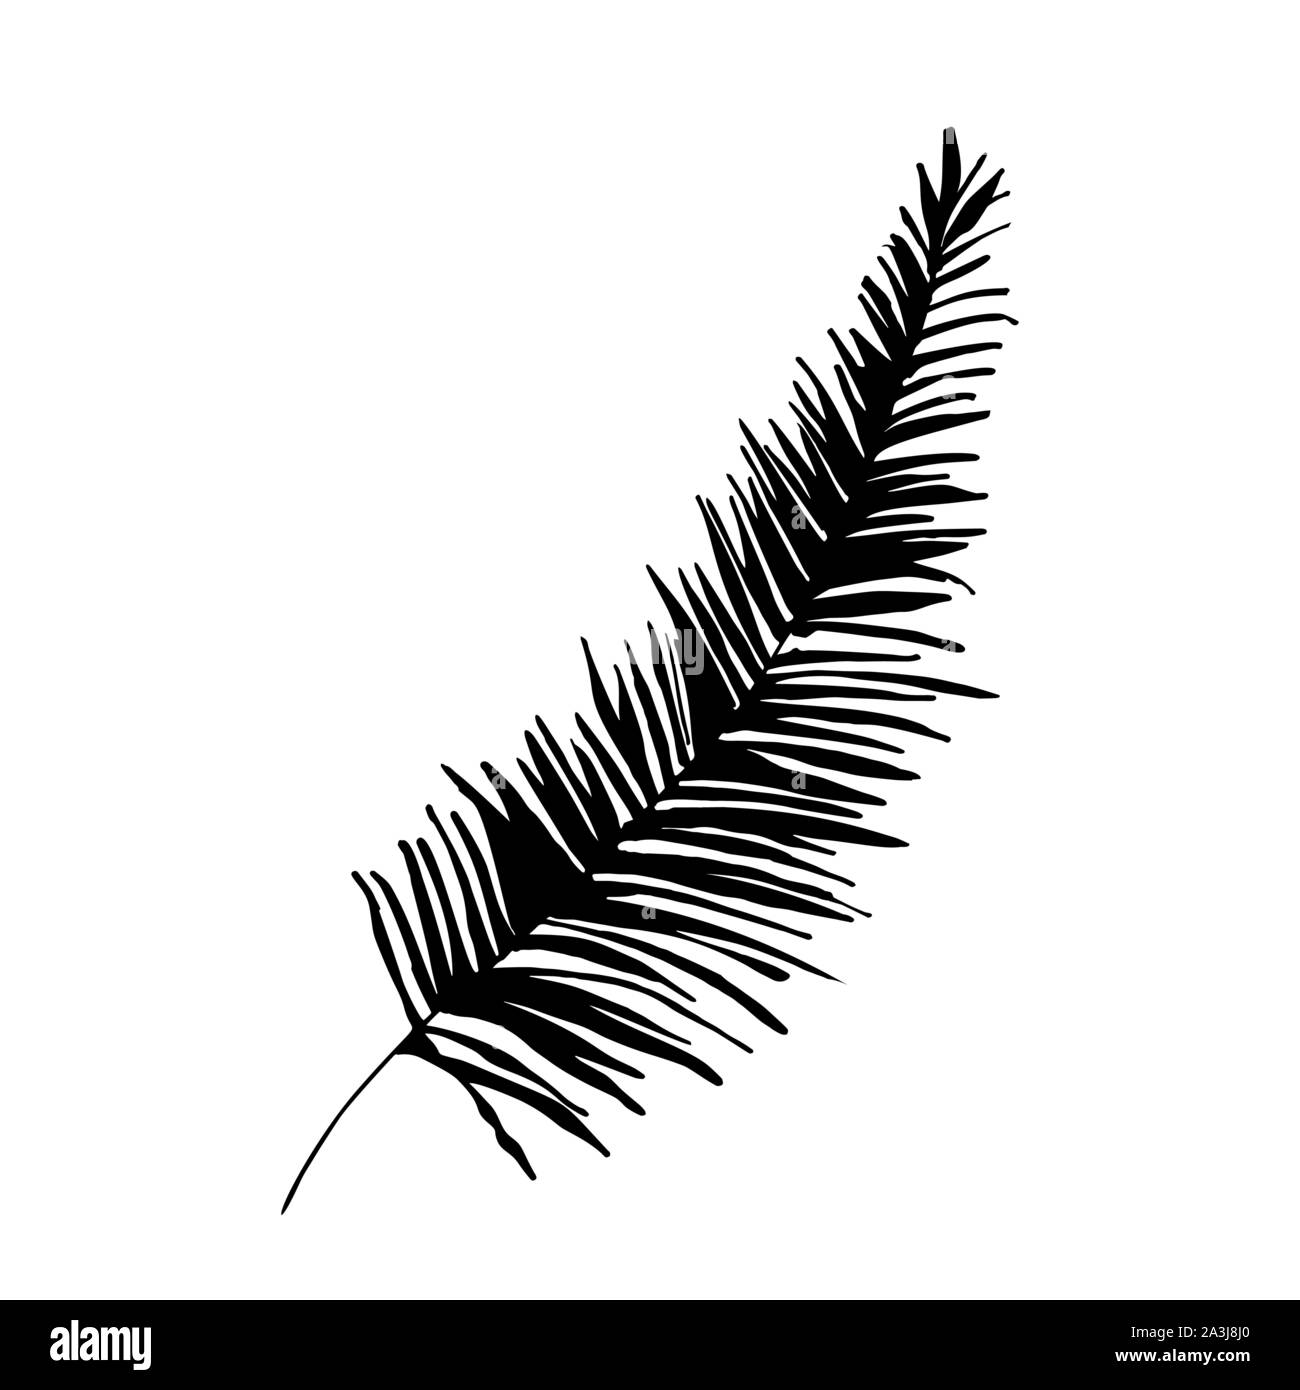 Palm tree foliage silhouette vector illustration. Exotic evergreen branch black symbol. Coniferous forest flora. Exotic plant leafage, fern isolated on white background. Botany poster design element Stock Vector